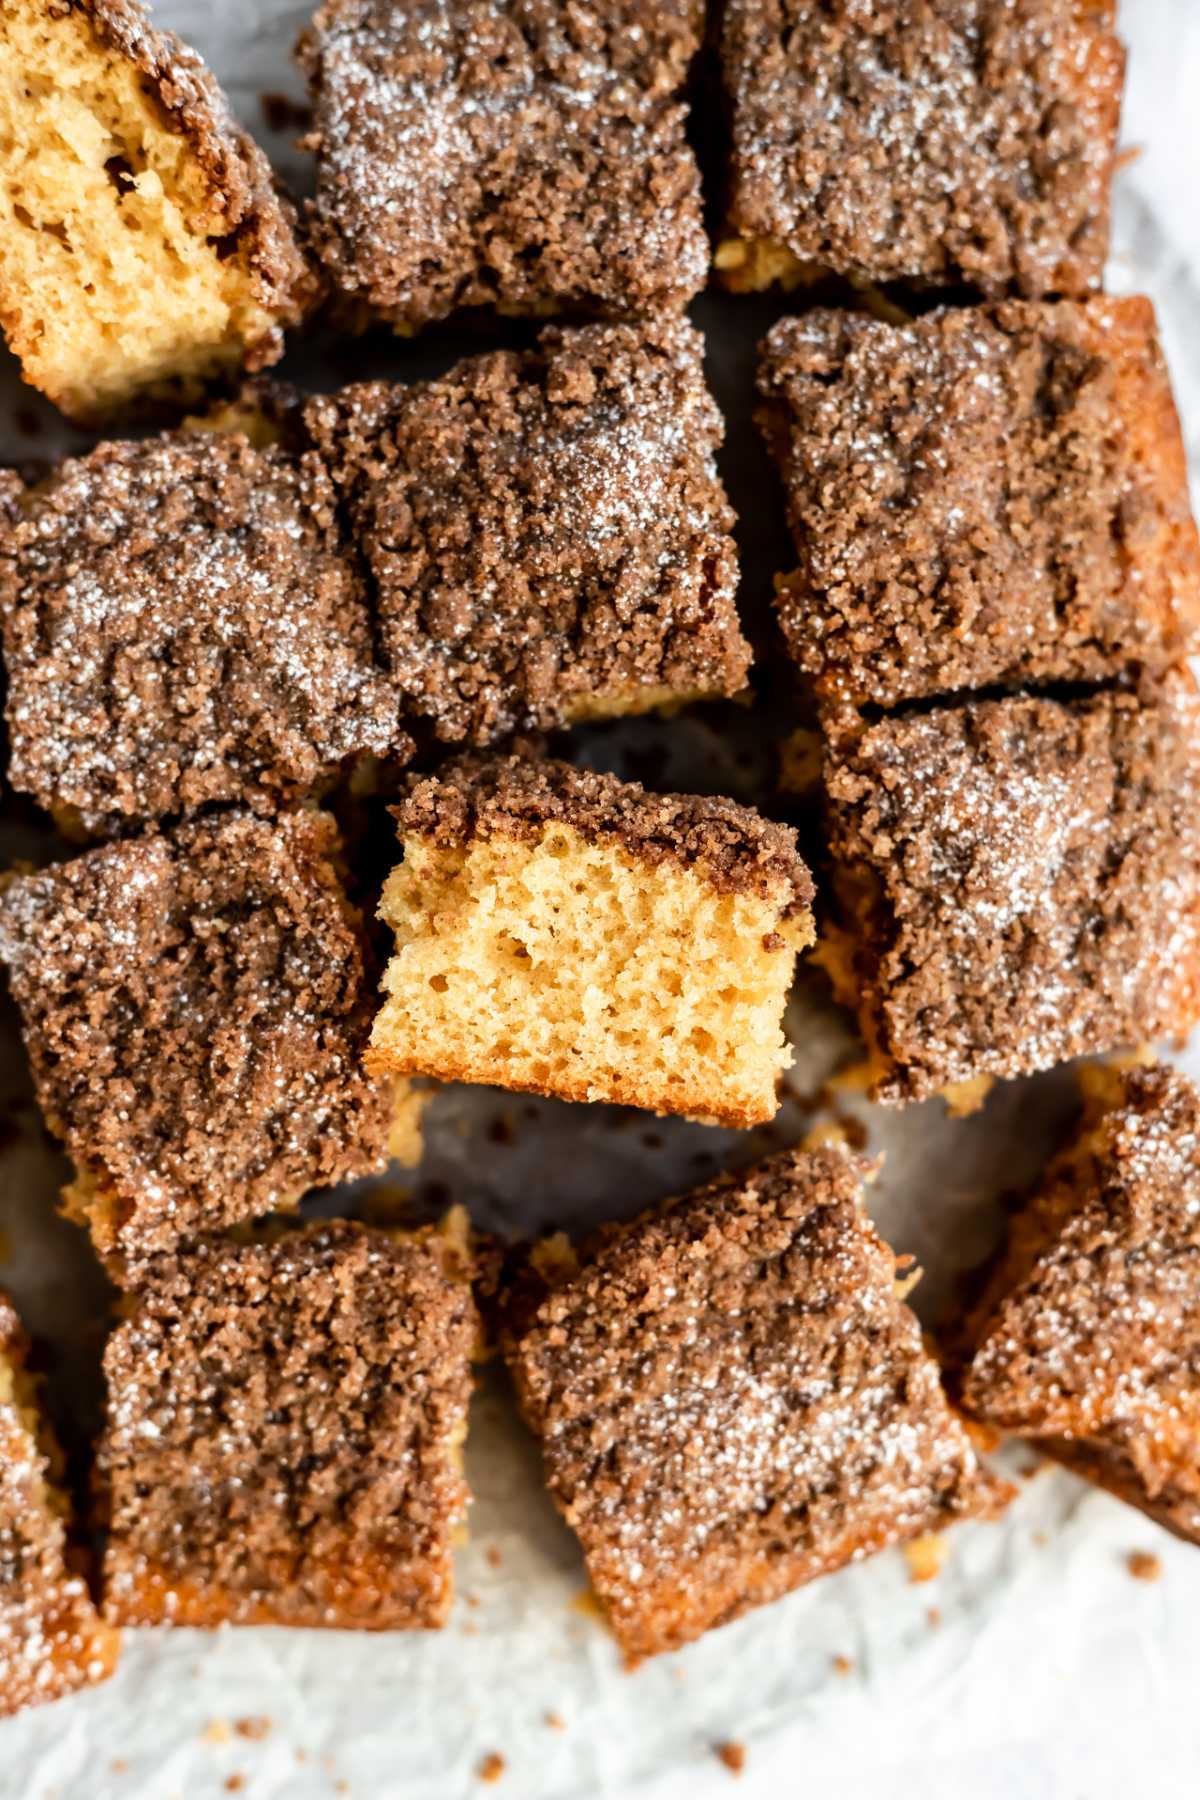 Pieces of coffee cake cut into squares.